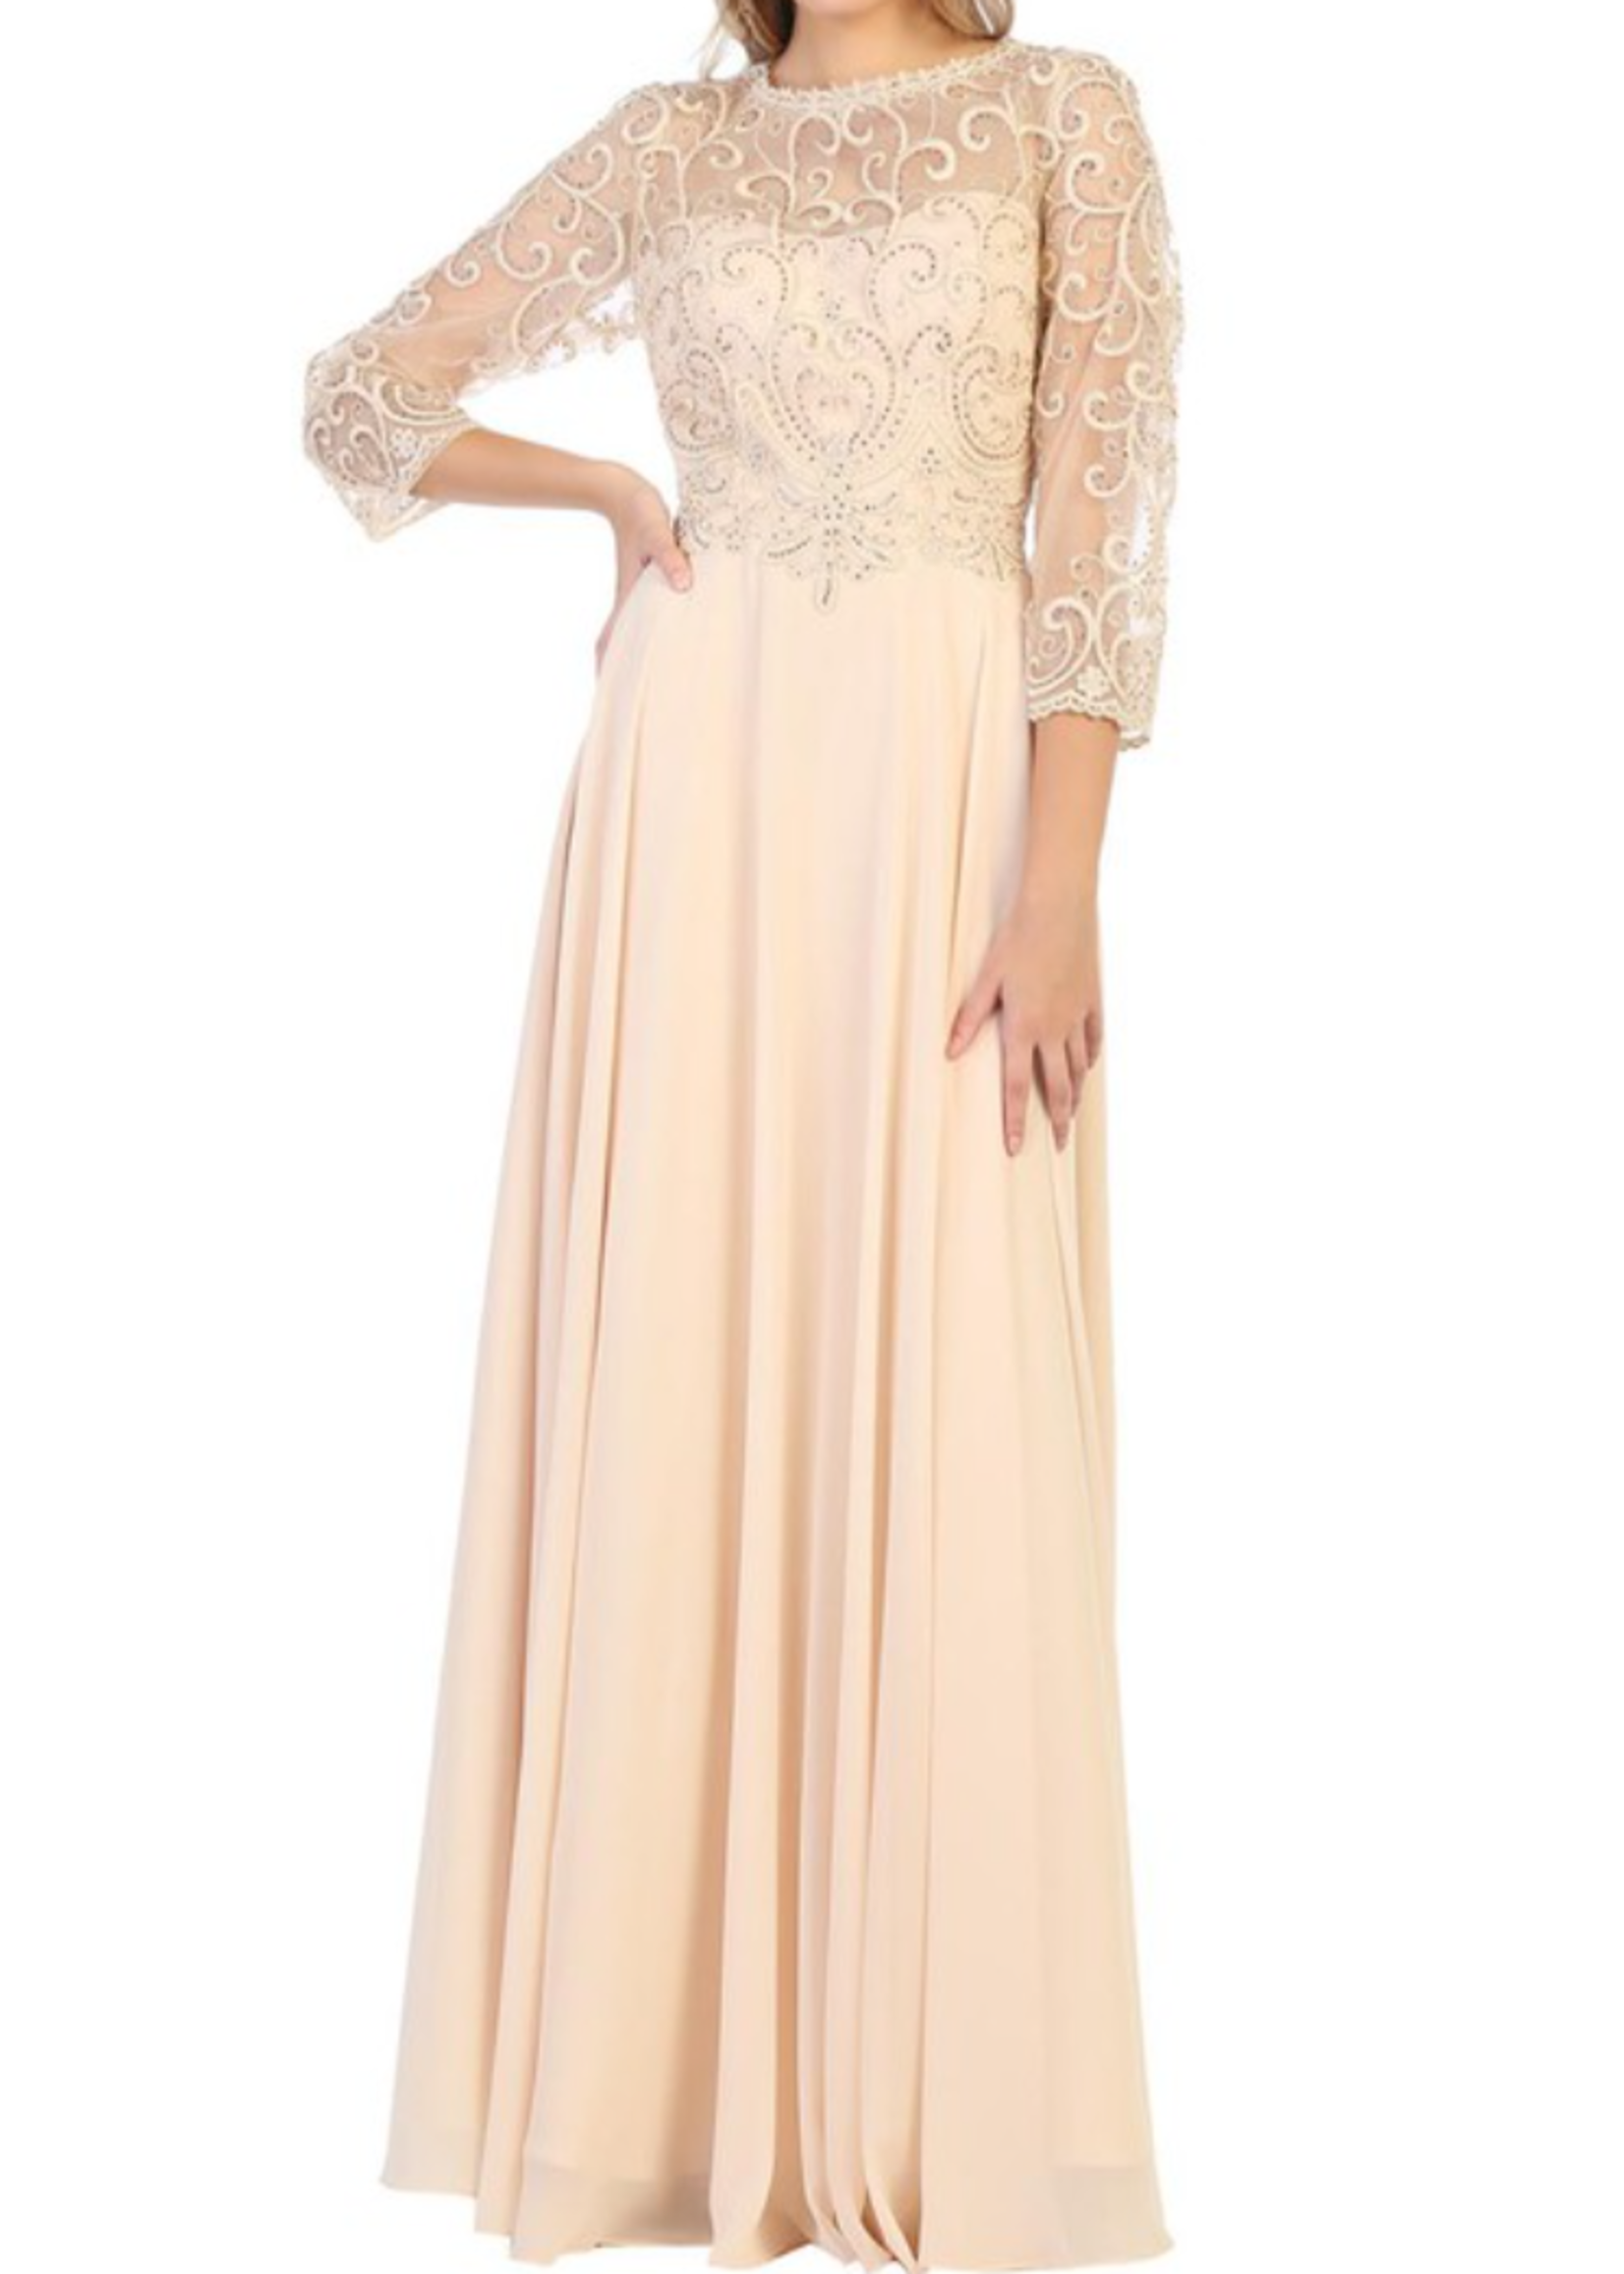 MQMQ1706 - SLEEVED MOB GOWN